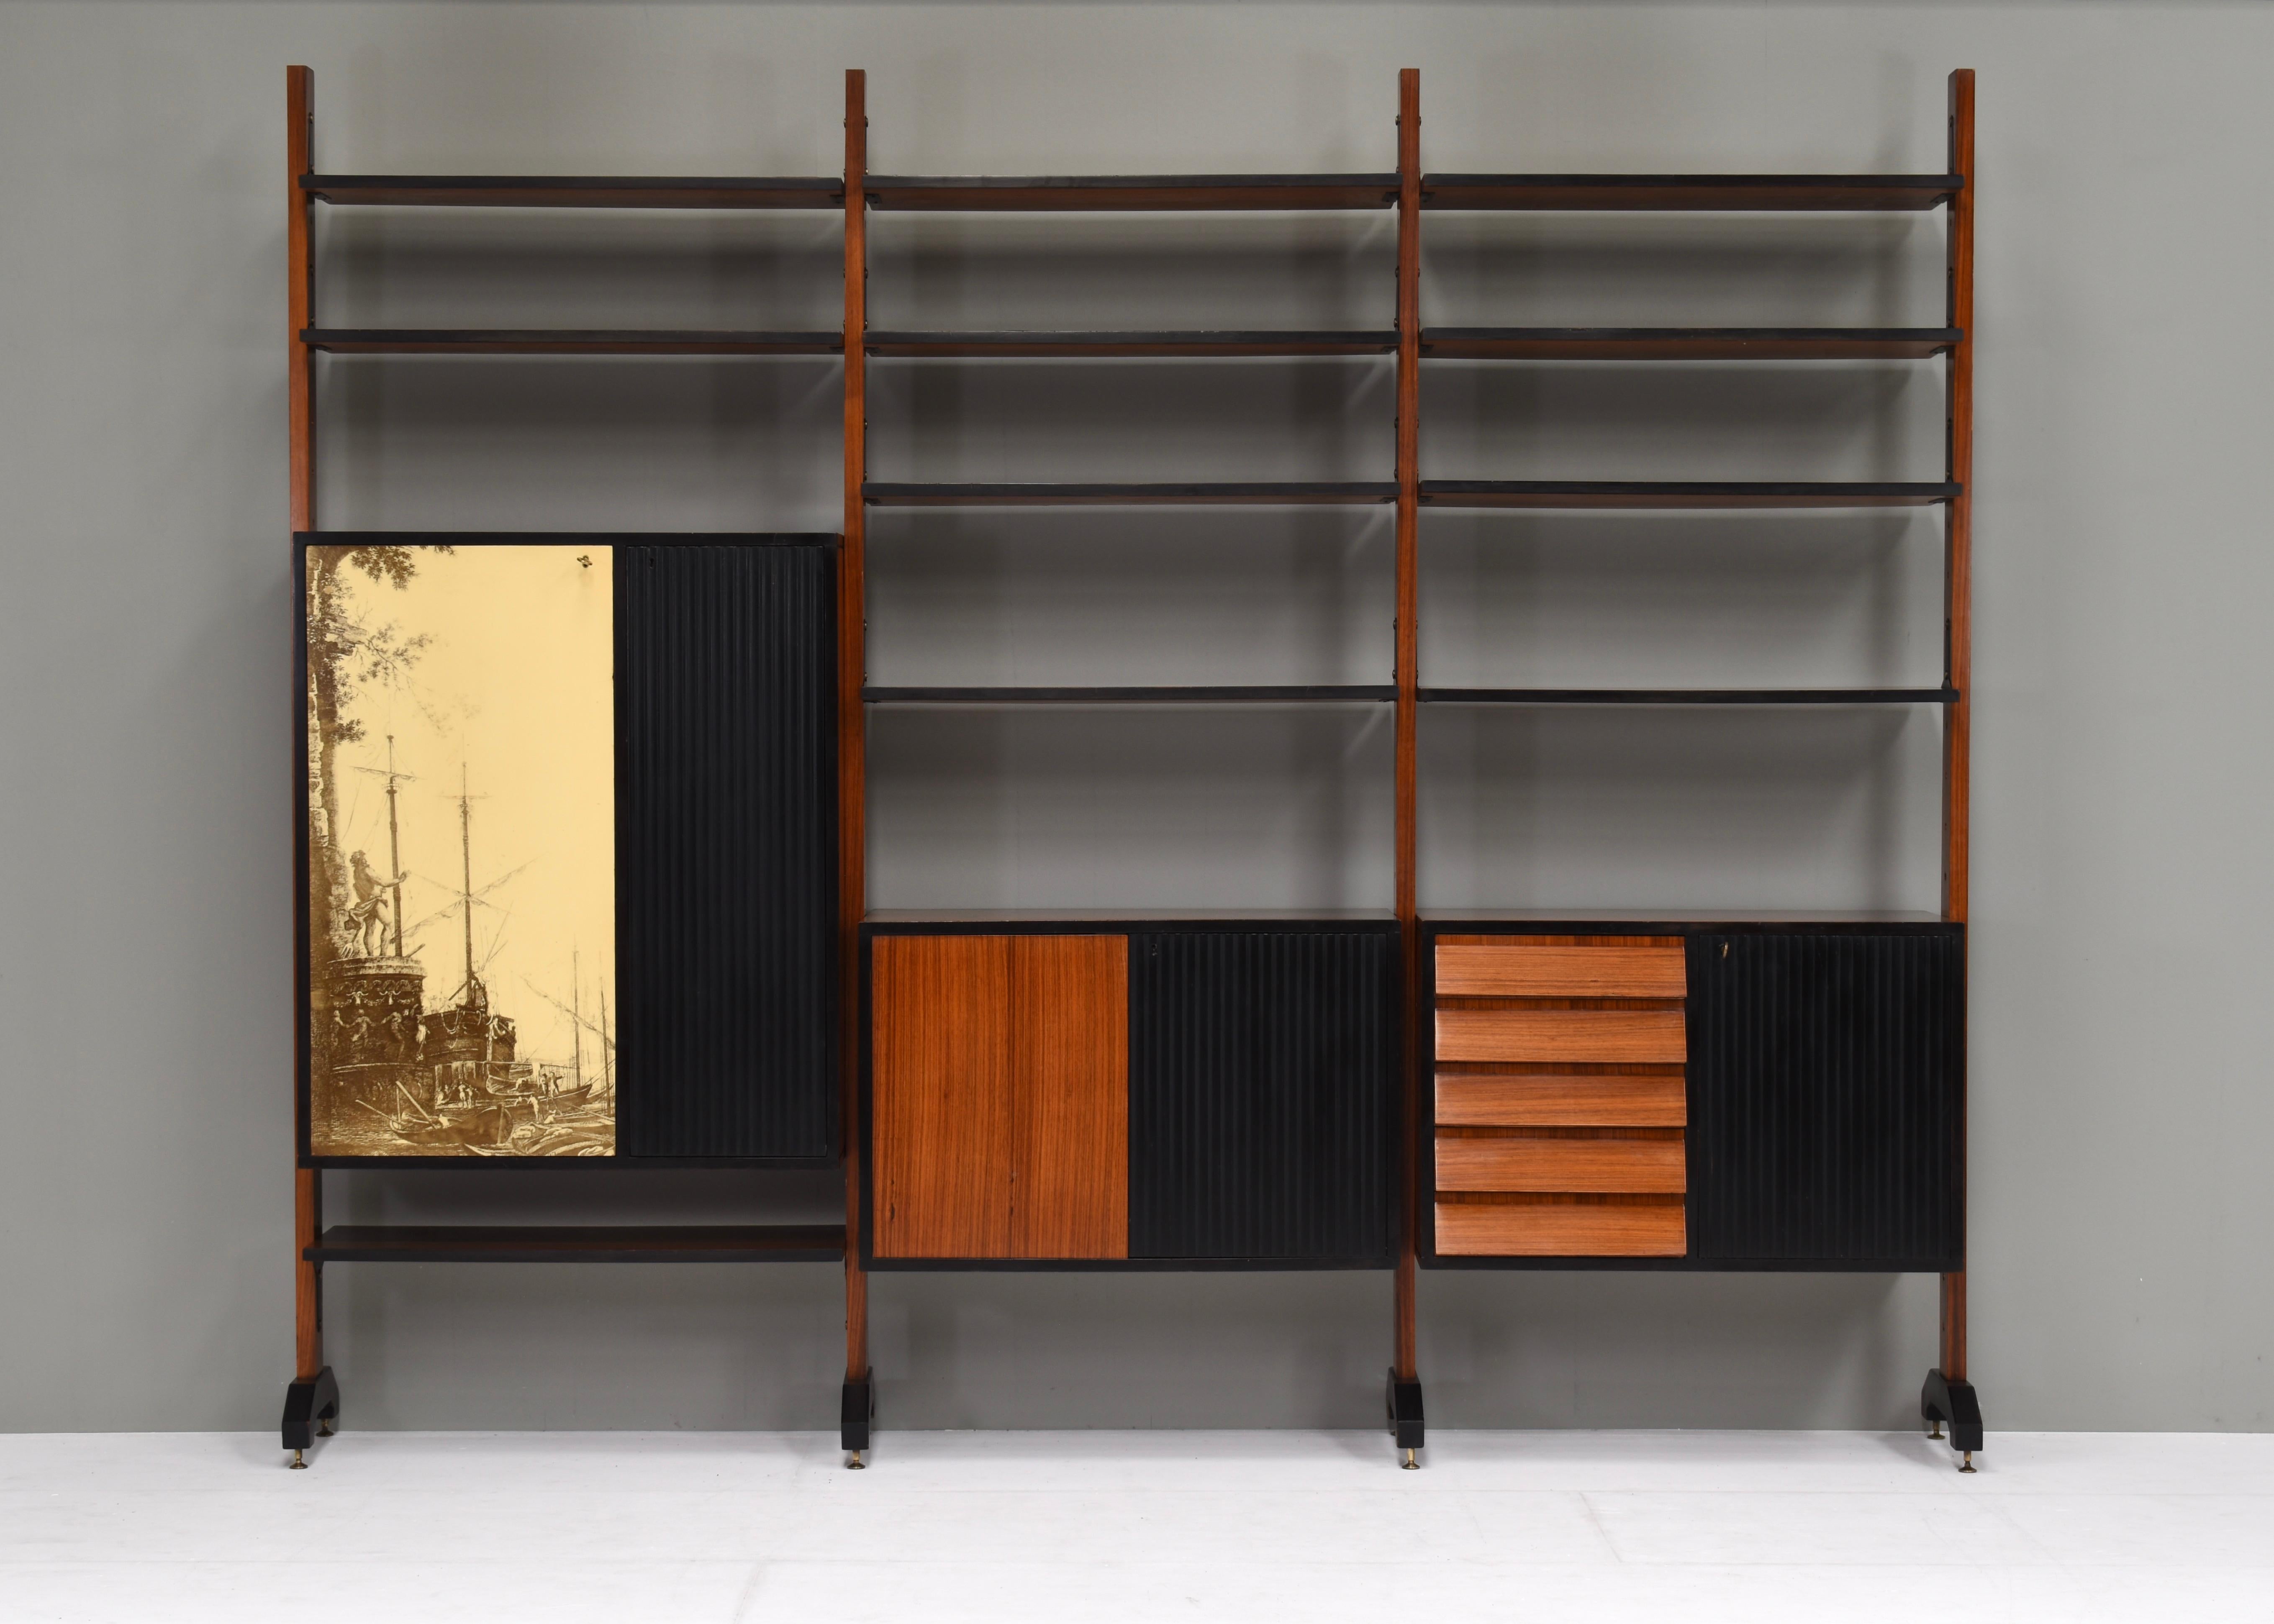 Sophisticated and very rare wall unit by Vittorio Dassi for Mobili Cantù - Italy, circa 1950-60.

The inside of the cabinets and drawers are covered very luxuriously in Birch veneer and red felt. The inside shelves are made of Birch and some of